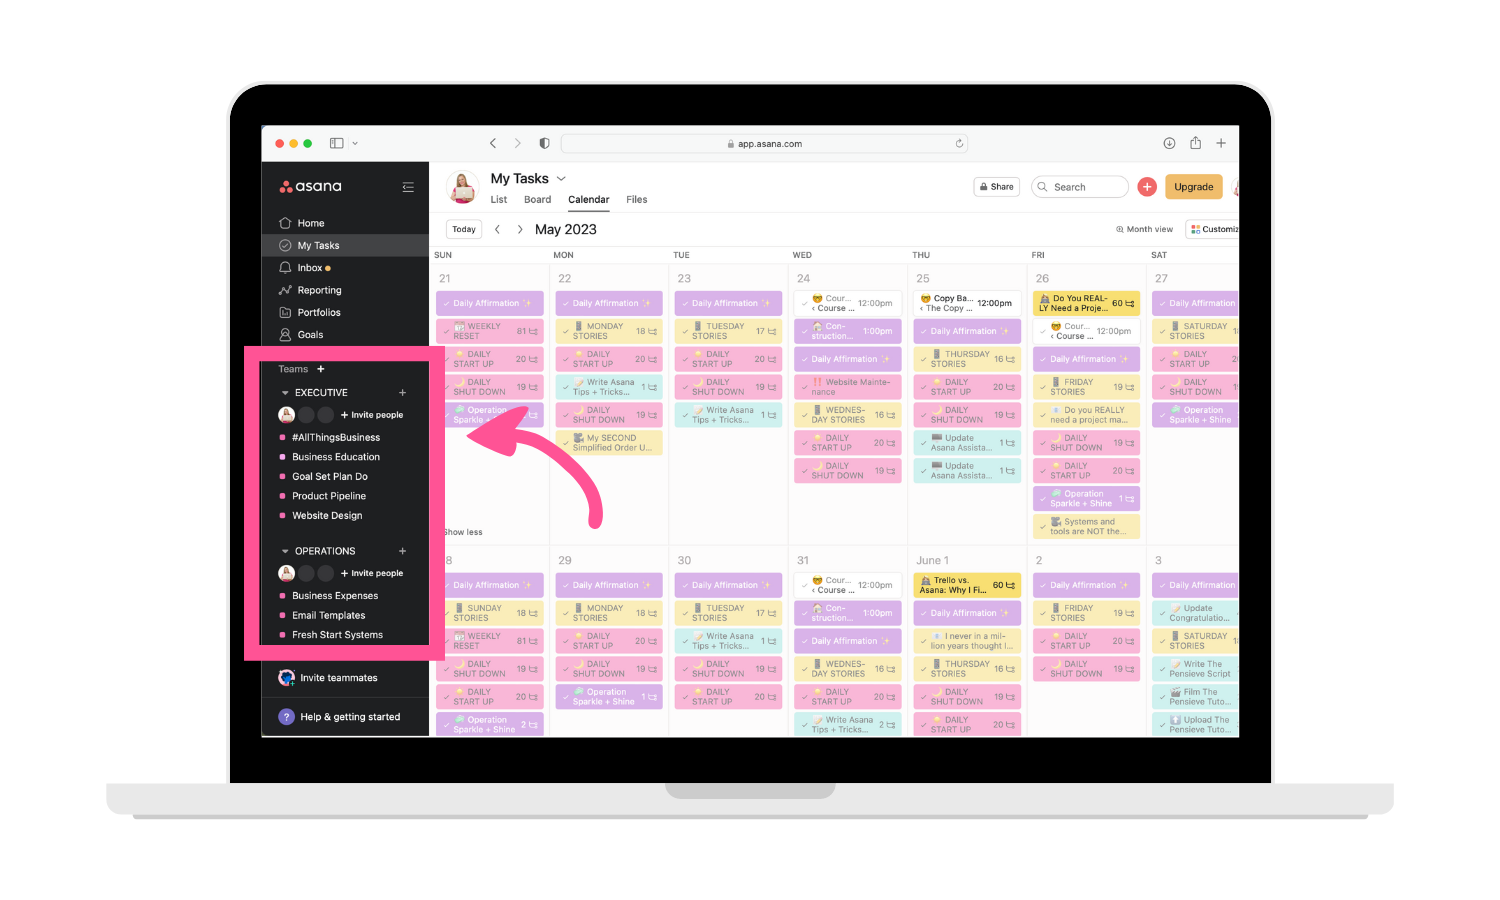 Screenshot of Asana My Tasks in monthly calendar view. The sidebar showcasing Teams in Asana is also visible and highlighted by a hot pink box. A hot pink arrow is also pointing to Teams in Asana.